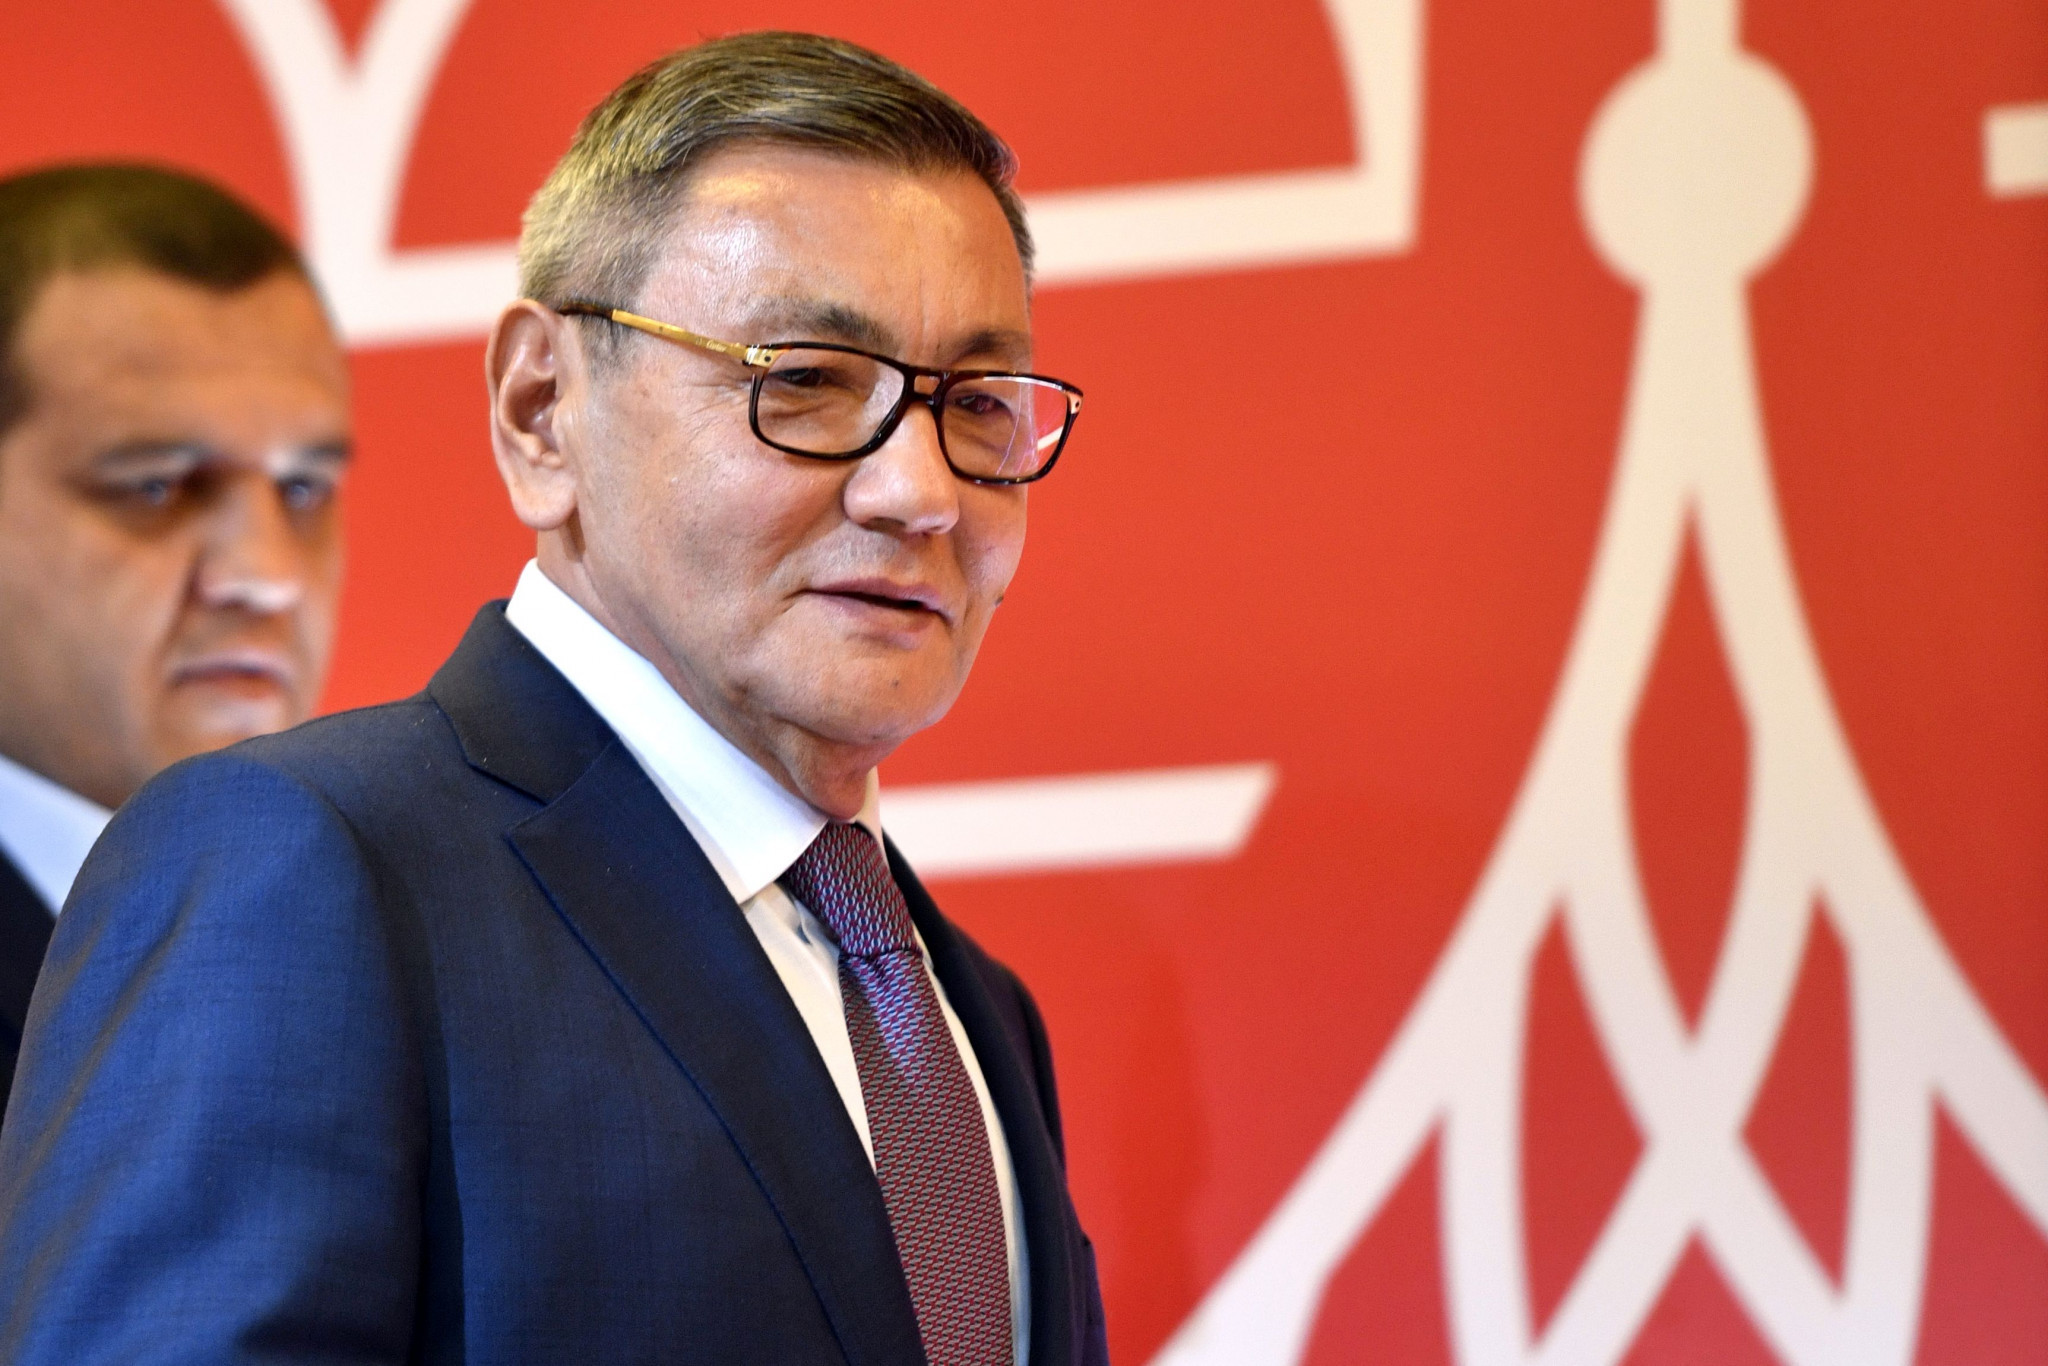 Gafur Rakhimov resigned as AIBA President last year to challenge his place on a sanctions list ©Getty Images